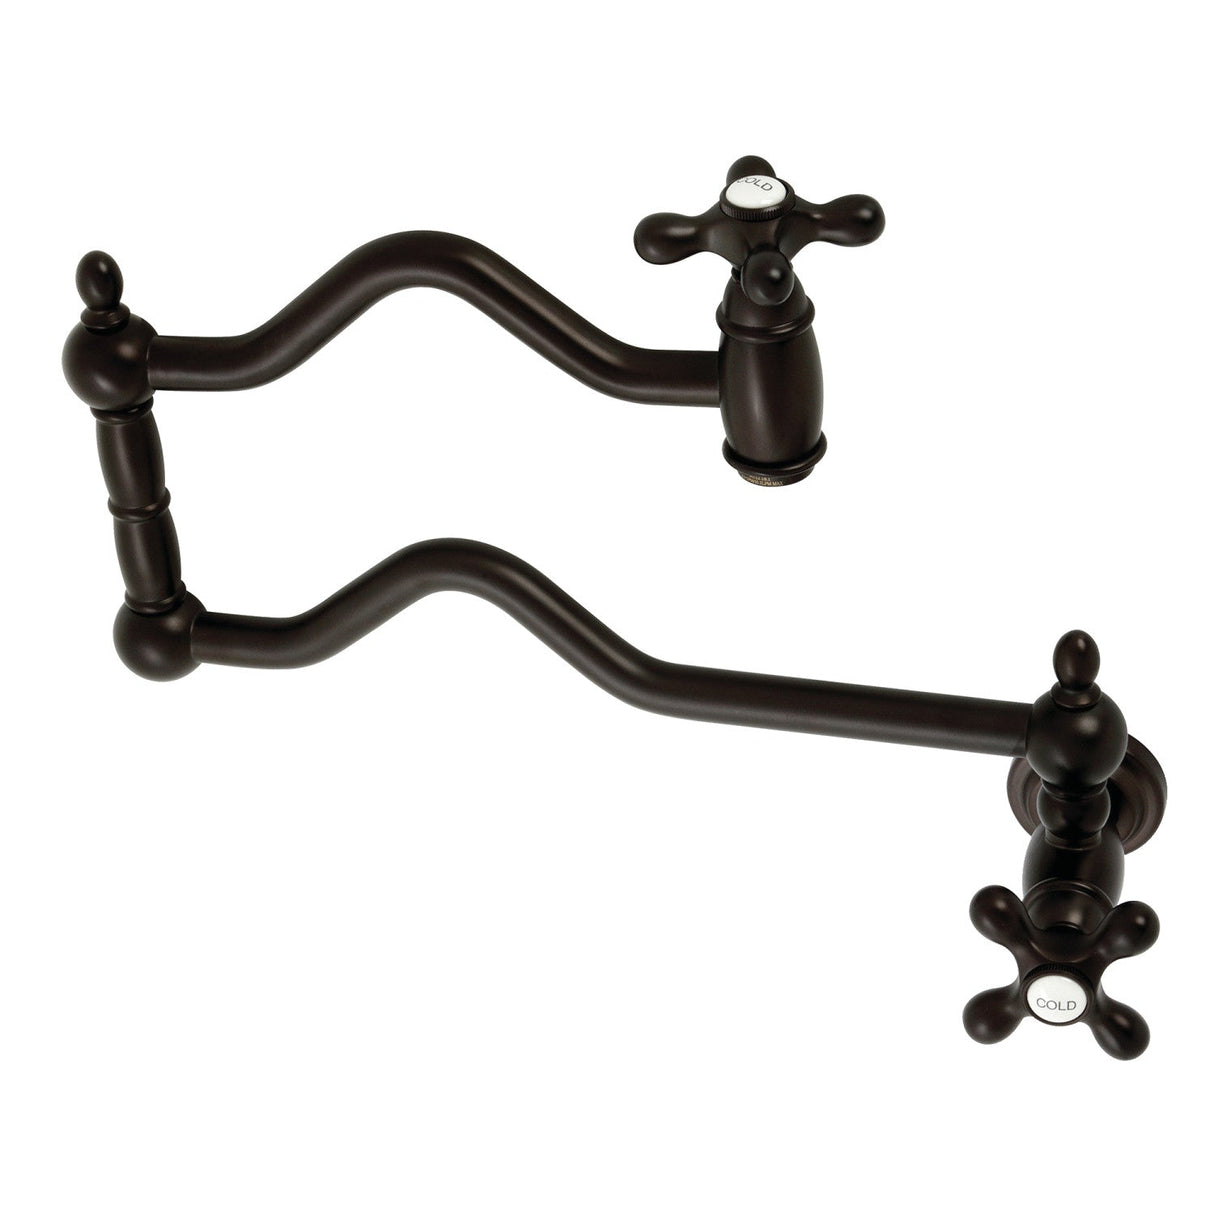 Heritage KS2105AX Two-Handle Pot Filler, Oil Rubbed Bronze